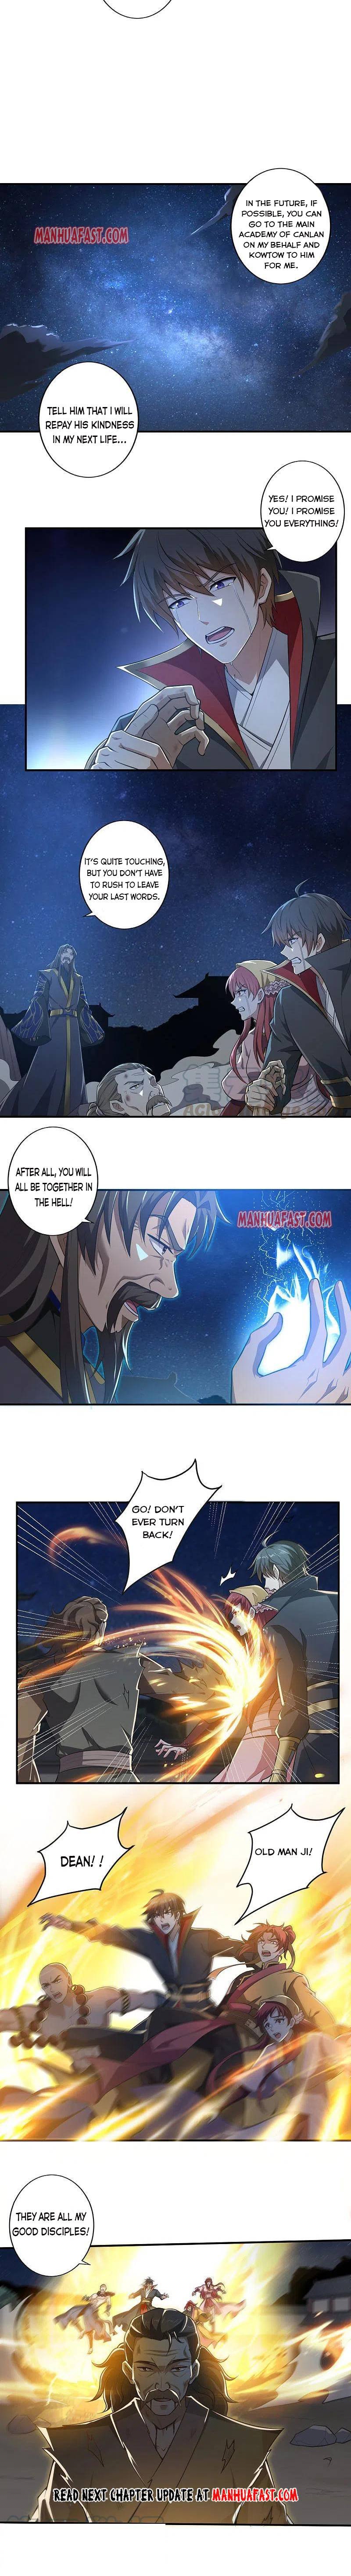 One Sword Reigns Supreme Chapter 133 - Page 4